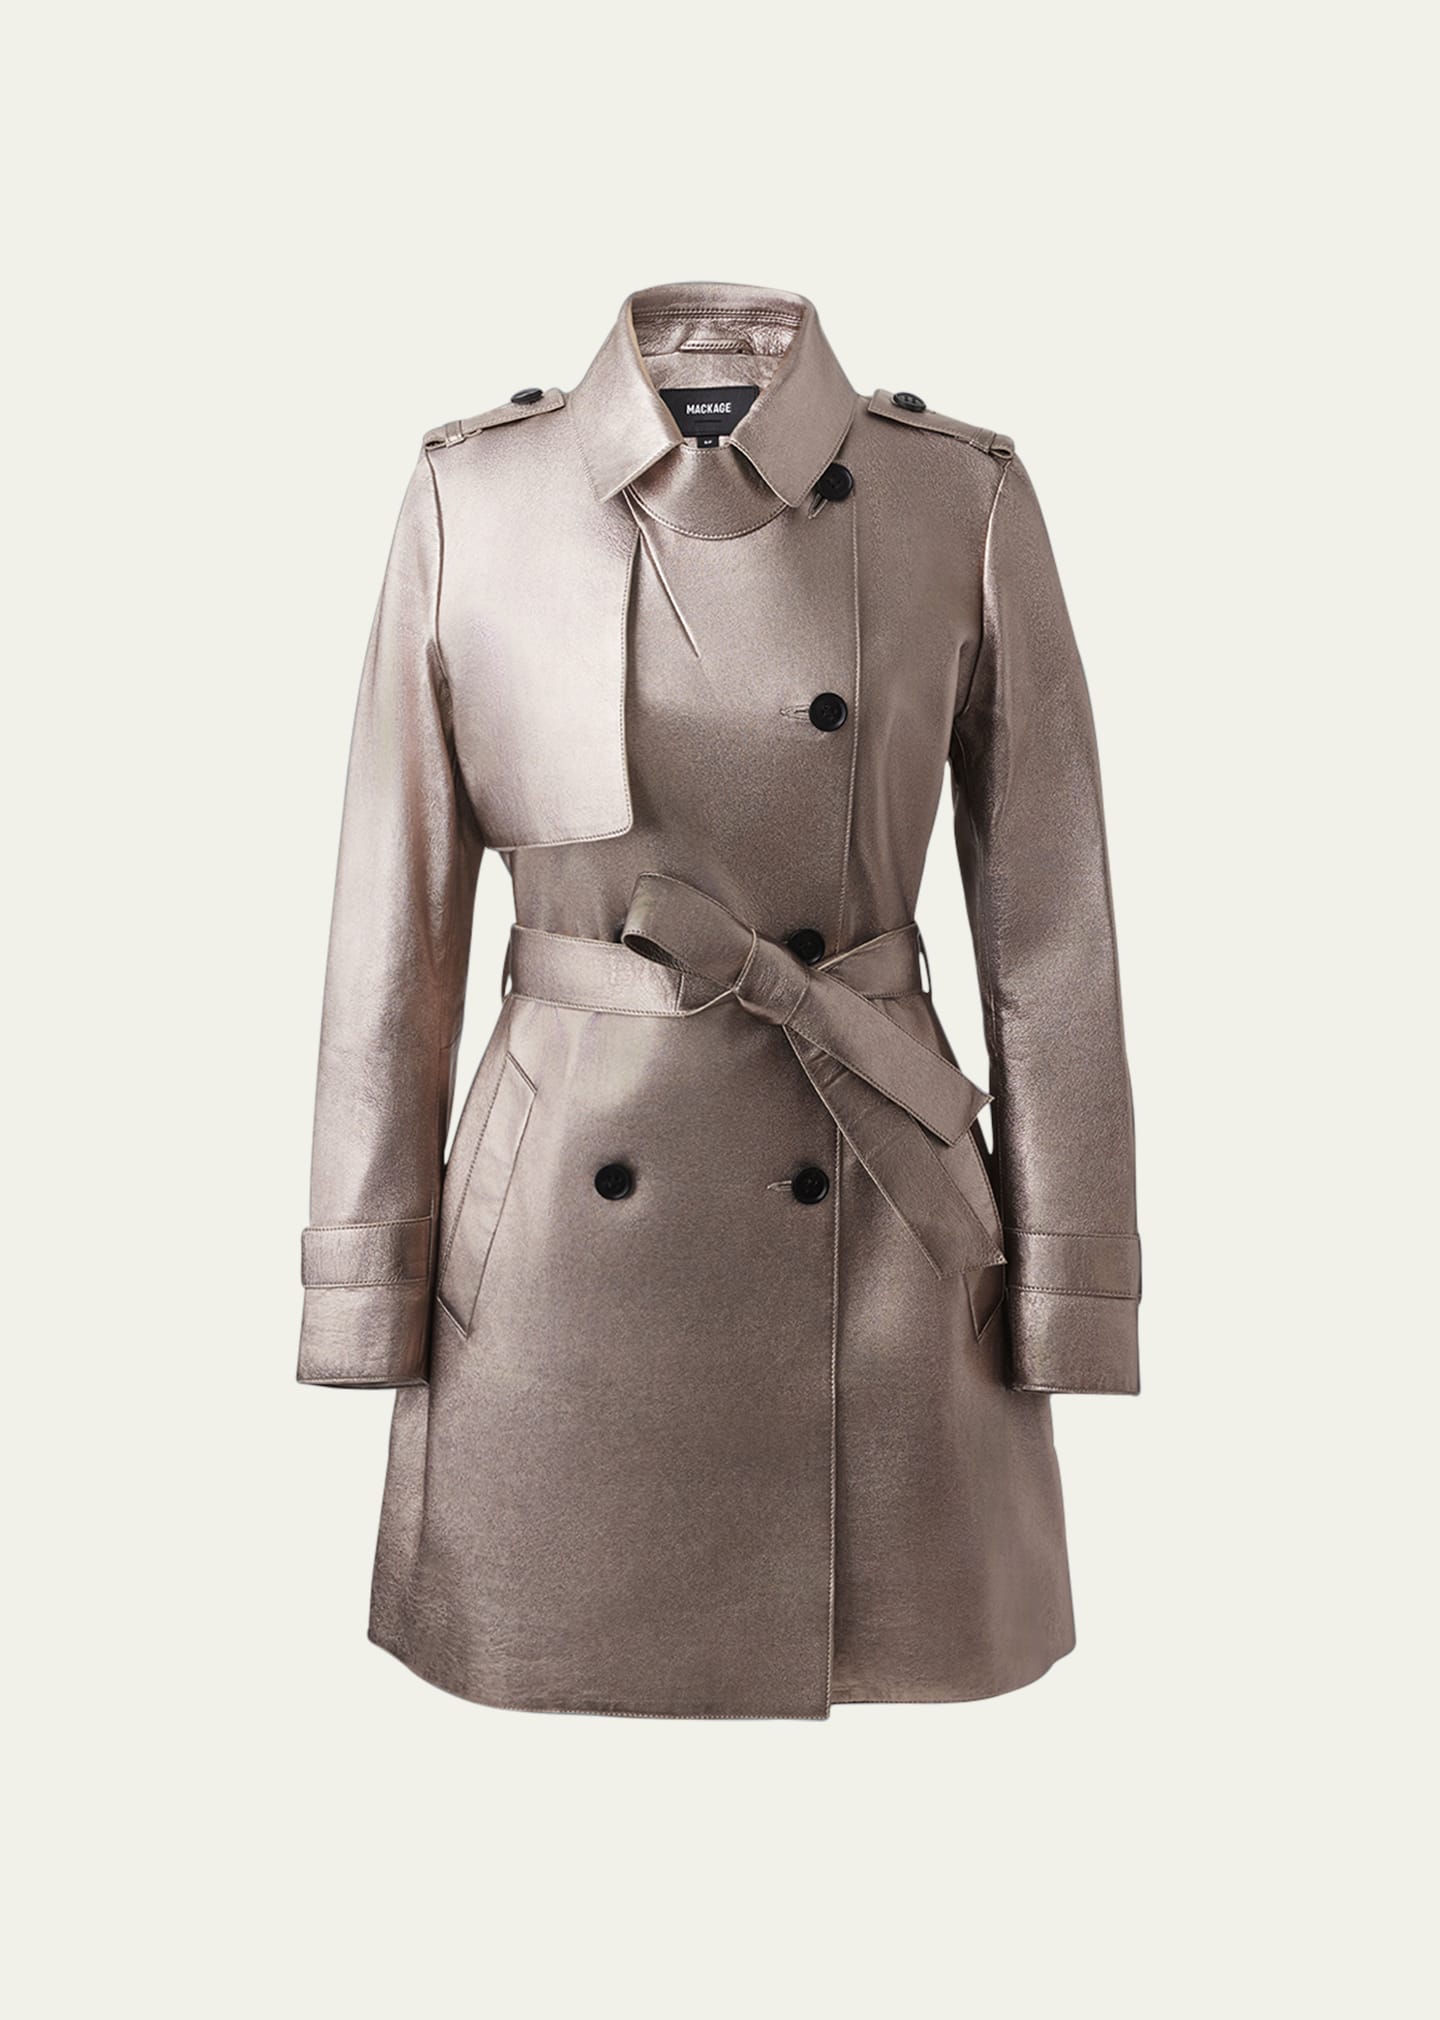 MACKAGE MELY LONG METALLIC LEATHER TRENCH COAT